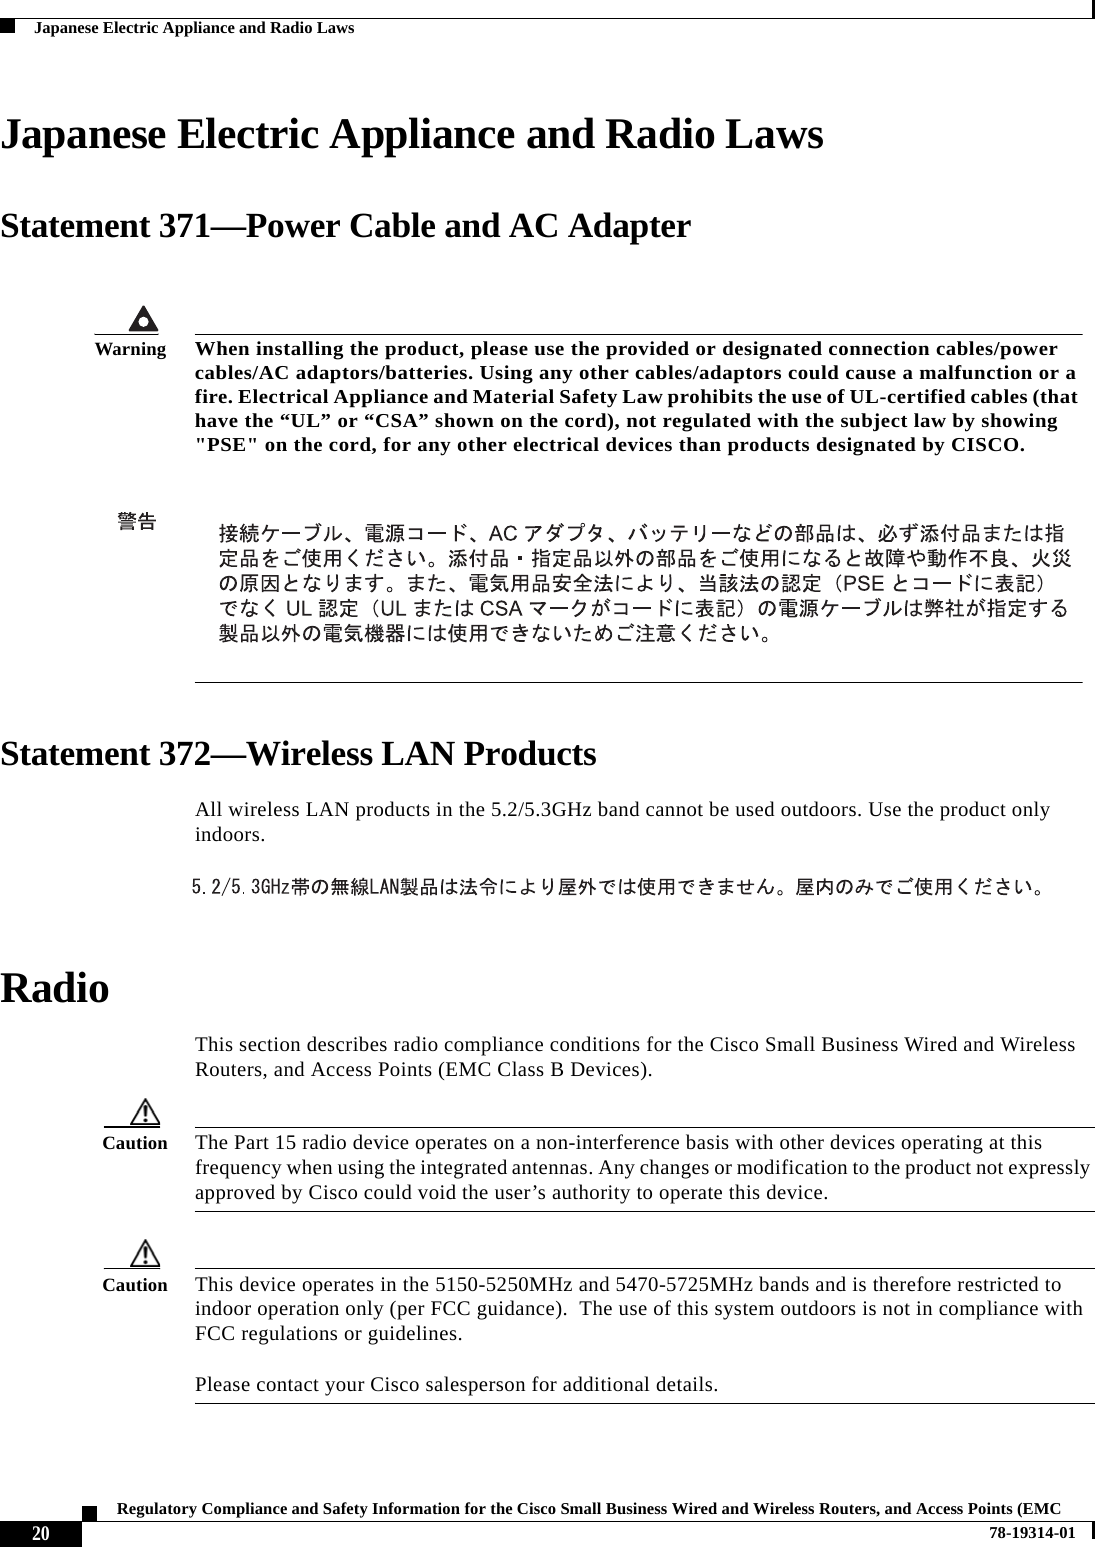  20Regulatory Compliance and Safety Information for the Cisco Small Business Wired and Wireless Routers, and Access Points (EMC 78-19314-01Japanese Electric Appliance and Radio LawsJapanese Electric Appliance and Radio LawsStatement 371—Power Cable and AC AdapterStatement 372—Wireless LAN ProductsAll wireless LAN products in the 5.2/5.3GHz band cannot be used outdoors. Use the product only indoors. RadioThis section describes radio compliance conditions for the Cisco Small Business Wired and Wireless Routers, and Access Points (EMC Class B Devices).Caution The Part 15 radio device operates on a non-interference basis with other devices operating at this frequency when using the integrated antennas. Any changes or modification to the product not expressly approved by Cisco could void the user’s authority to operate this device.Caution This device operates in the 5150-5250MHz and 5470-5725MHz bands and is therefore restricted to indoor operation only (per FCC guidance).  The use of this system outdoors is not in compliance with FCC regulations or guidelines.   Please contact your Cisco salesperson for additional details.WarningWhen installing the product, please use the provided or designated connection cables/power cables/AC adaptors/batteries. Using any other cables/adaptors could cause a malfunction or a fire. Electrical Appliance and Material Safety Law prohibits the use of UL-certified cables (that have the “UL” or “CSA” shown on the cord), not regulated with the subject law by showing &quot;PSE&quot; on the cord, for any other electrical devices than products designated by CISCO.